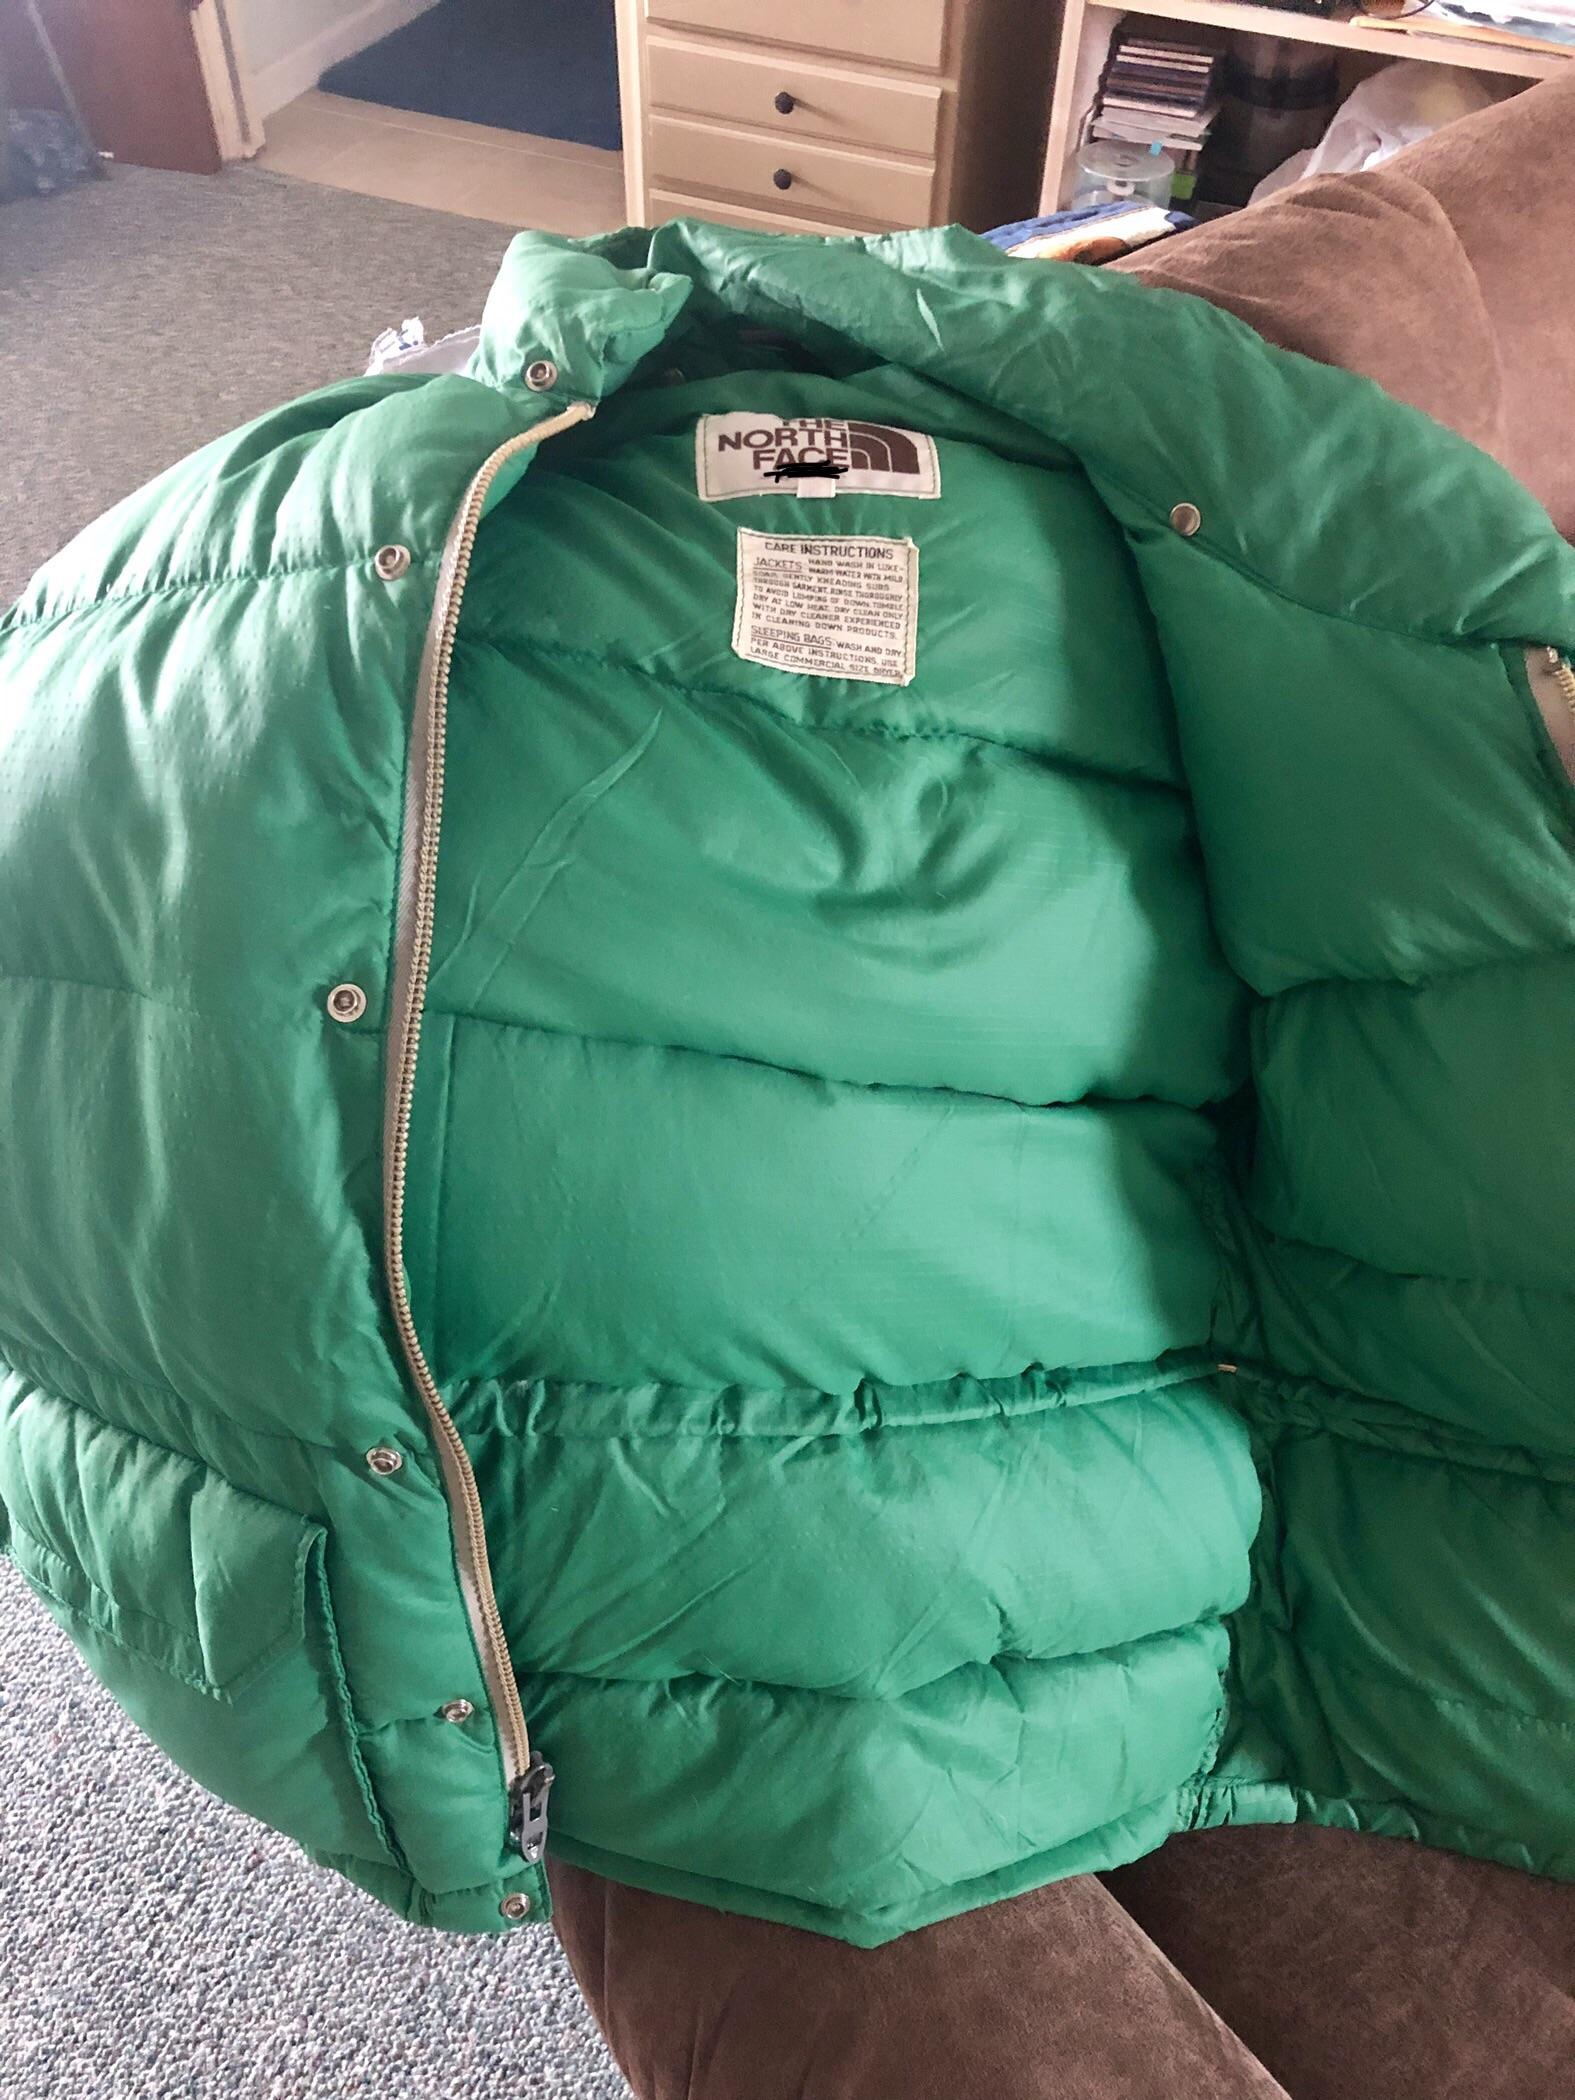 old North Face jacket